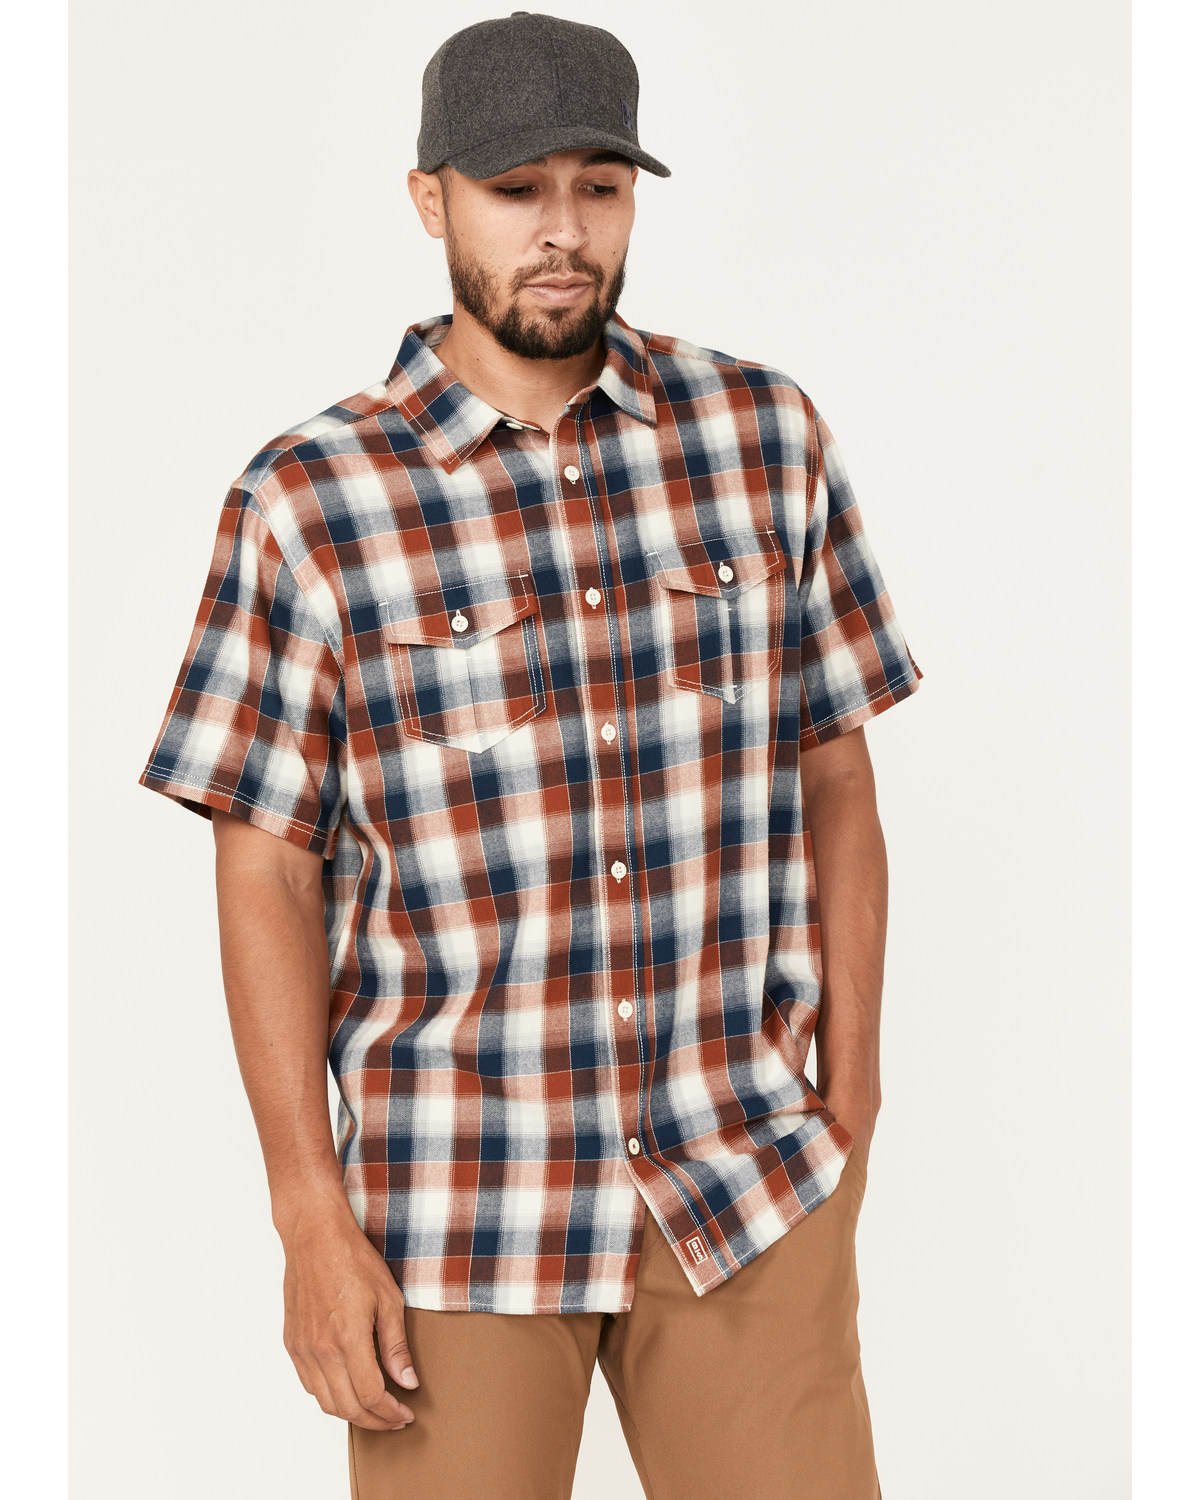 Brothers and Sons Men's Casual Plaid Short Sleeve Button-Down Western Shirt